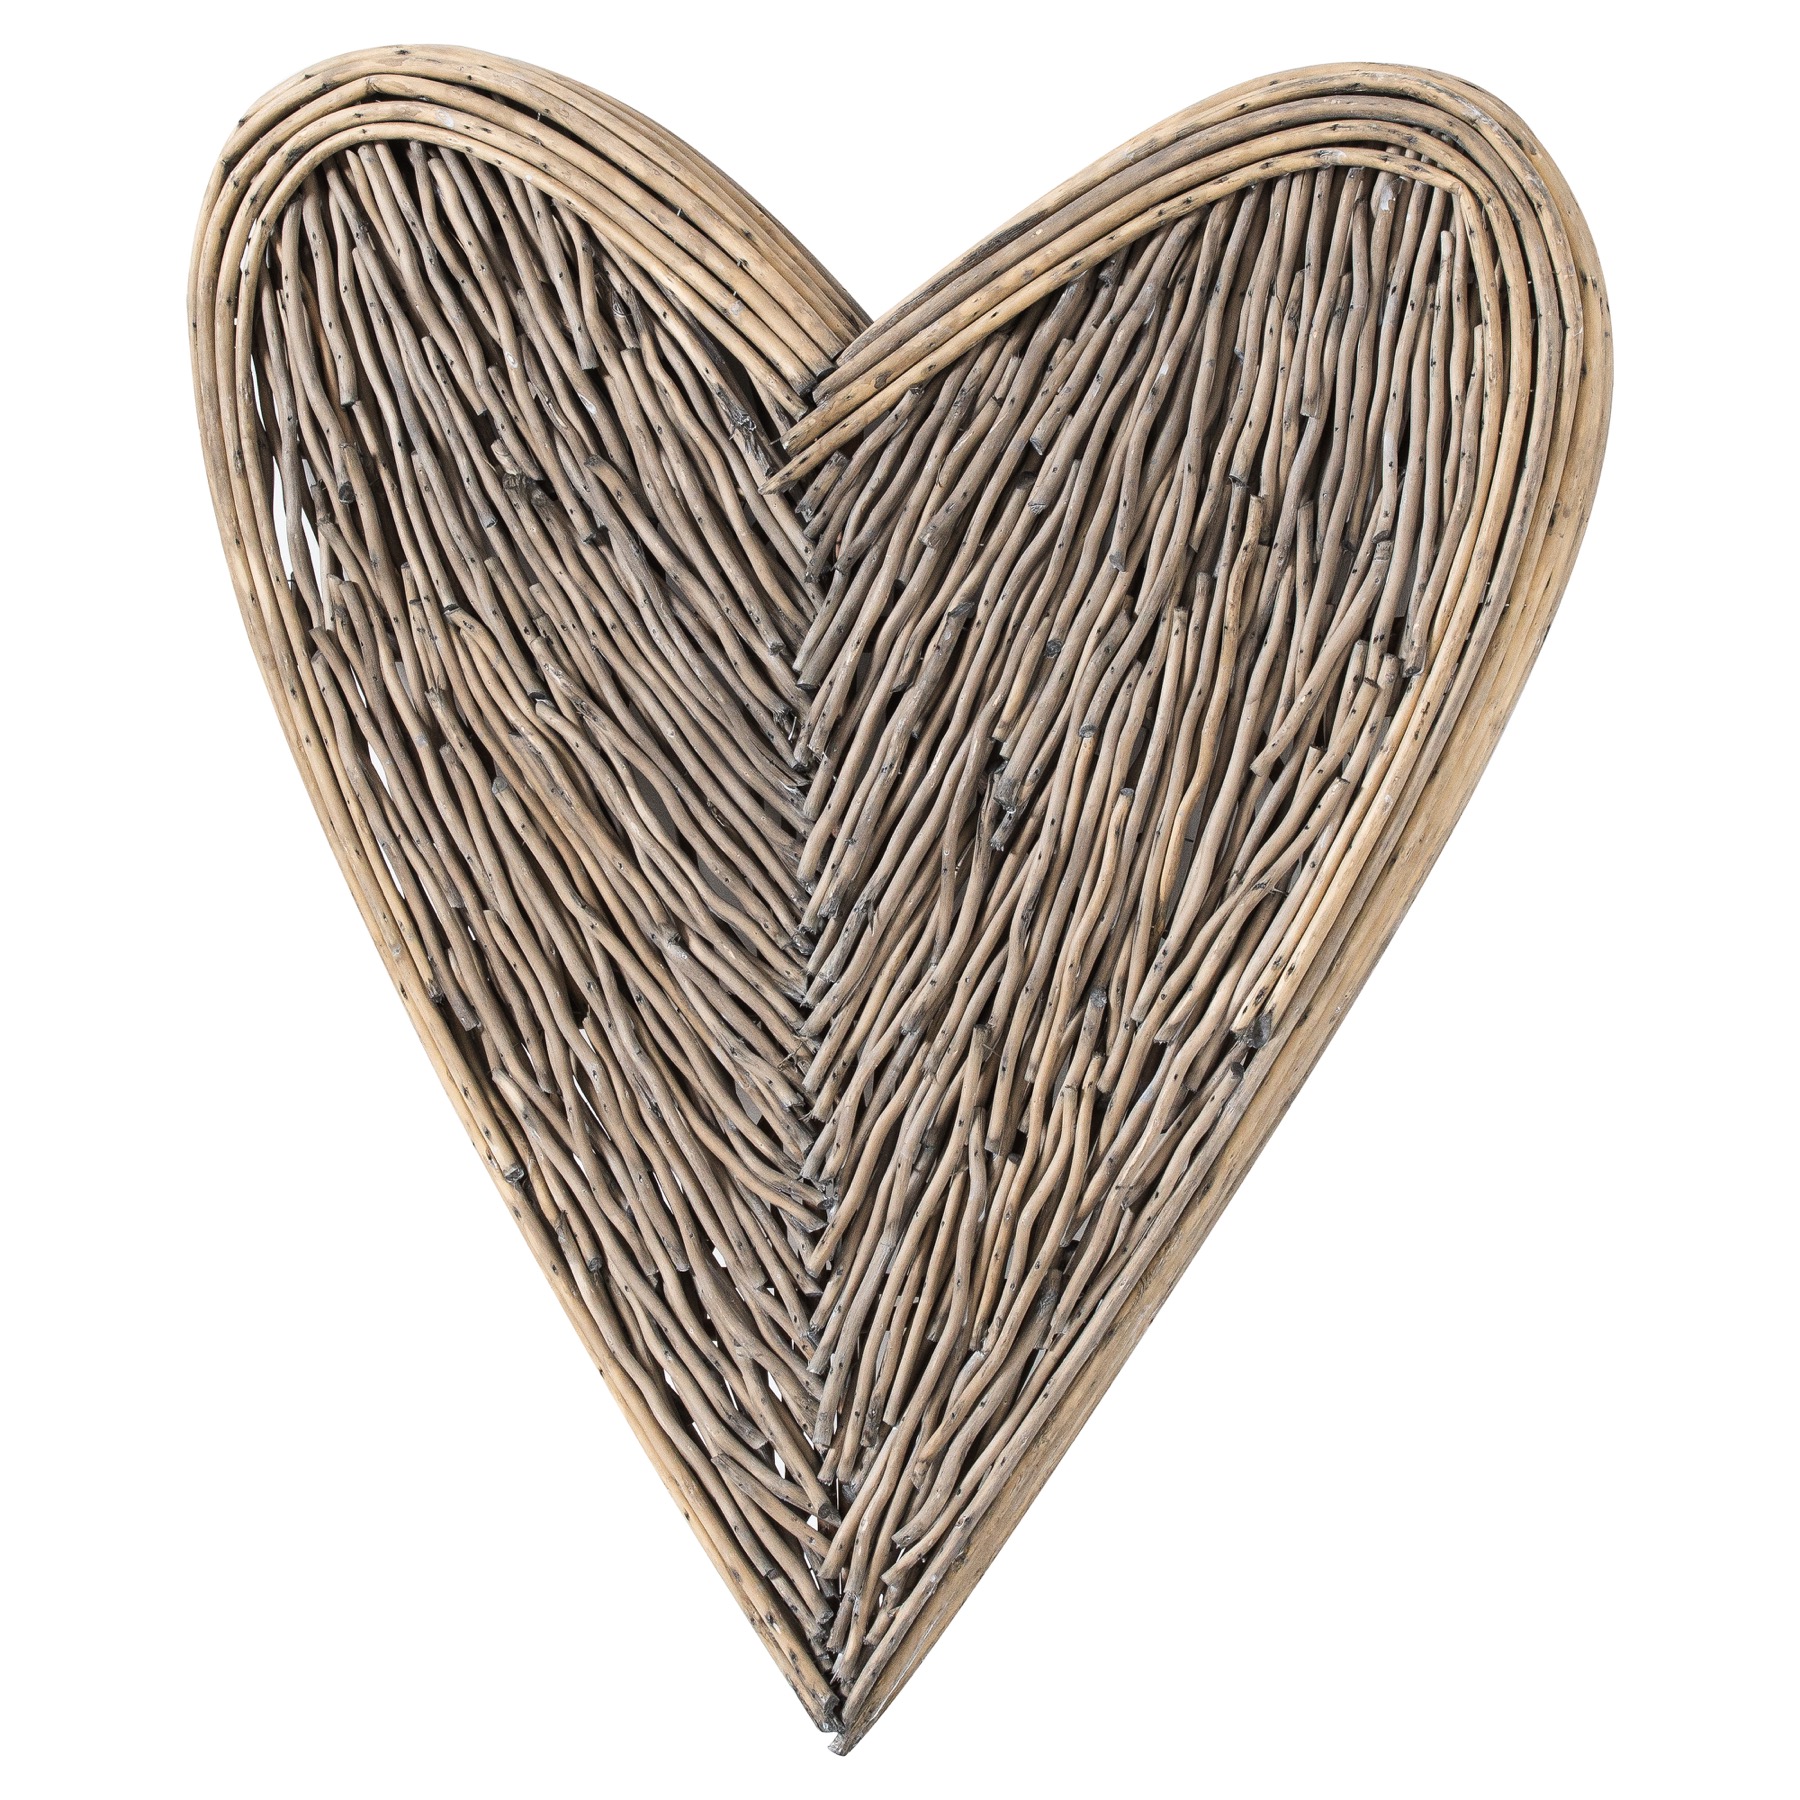 Willow Branch Heart - Image 1